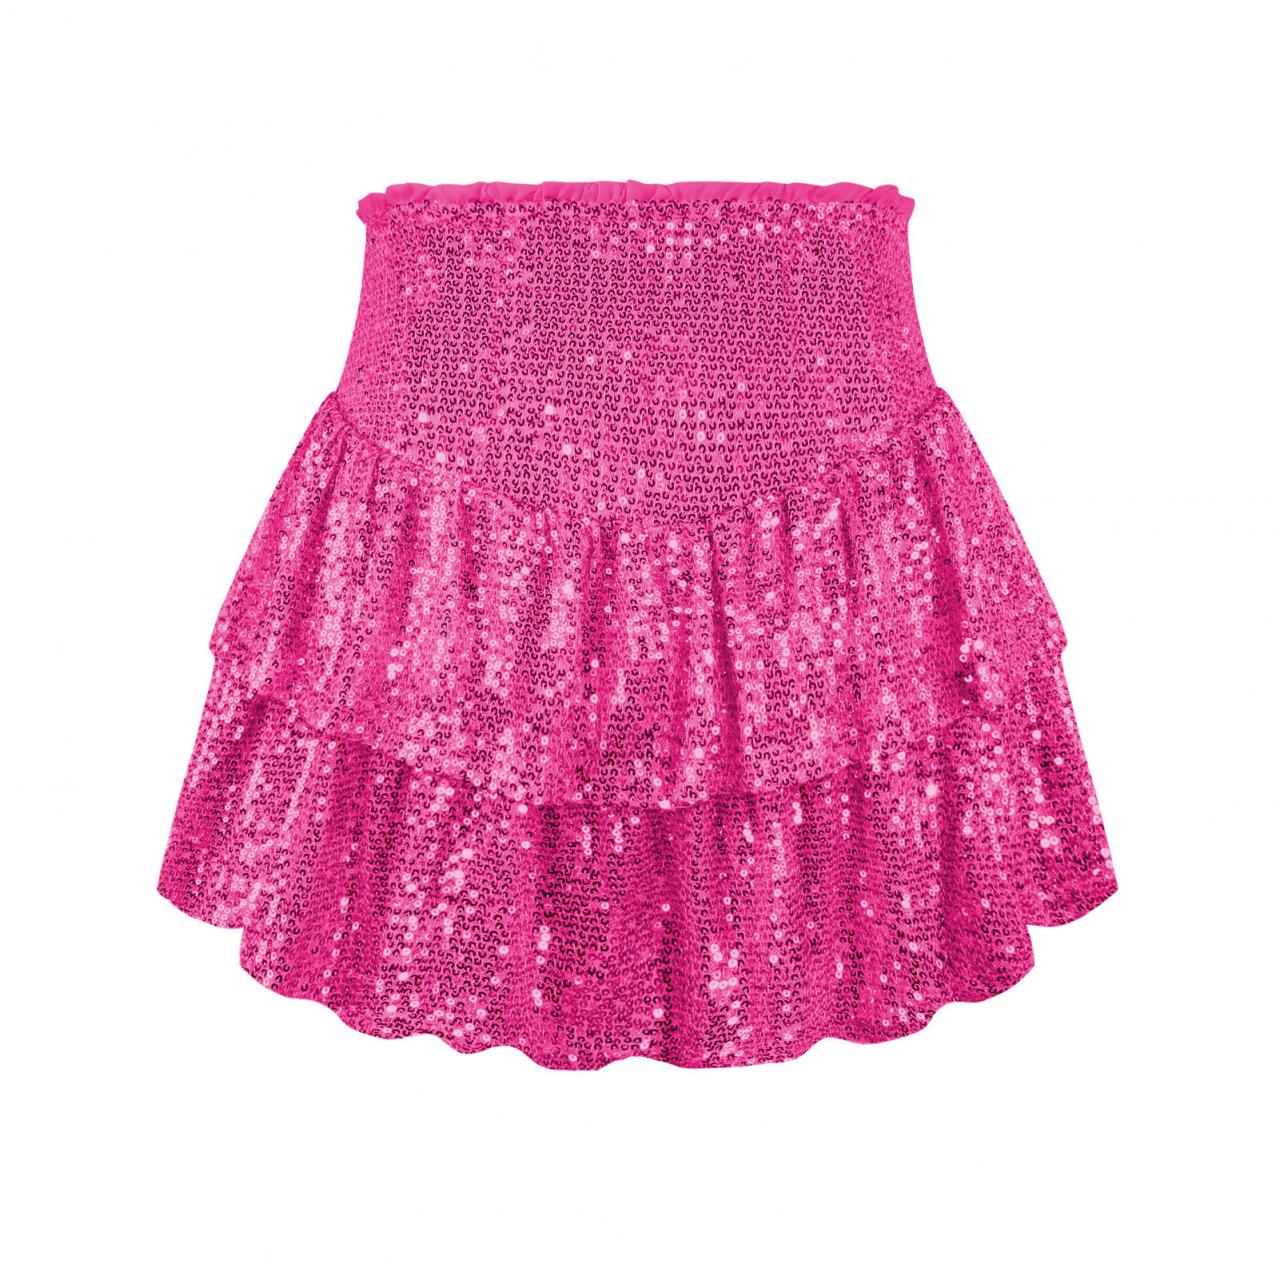 Spice Girl Pearl Flake Skirt Female Autumn Fashion Sexy Skirt Solid Color Pleated Skirt